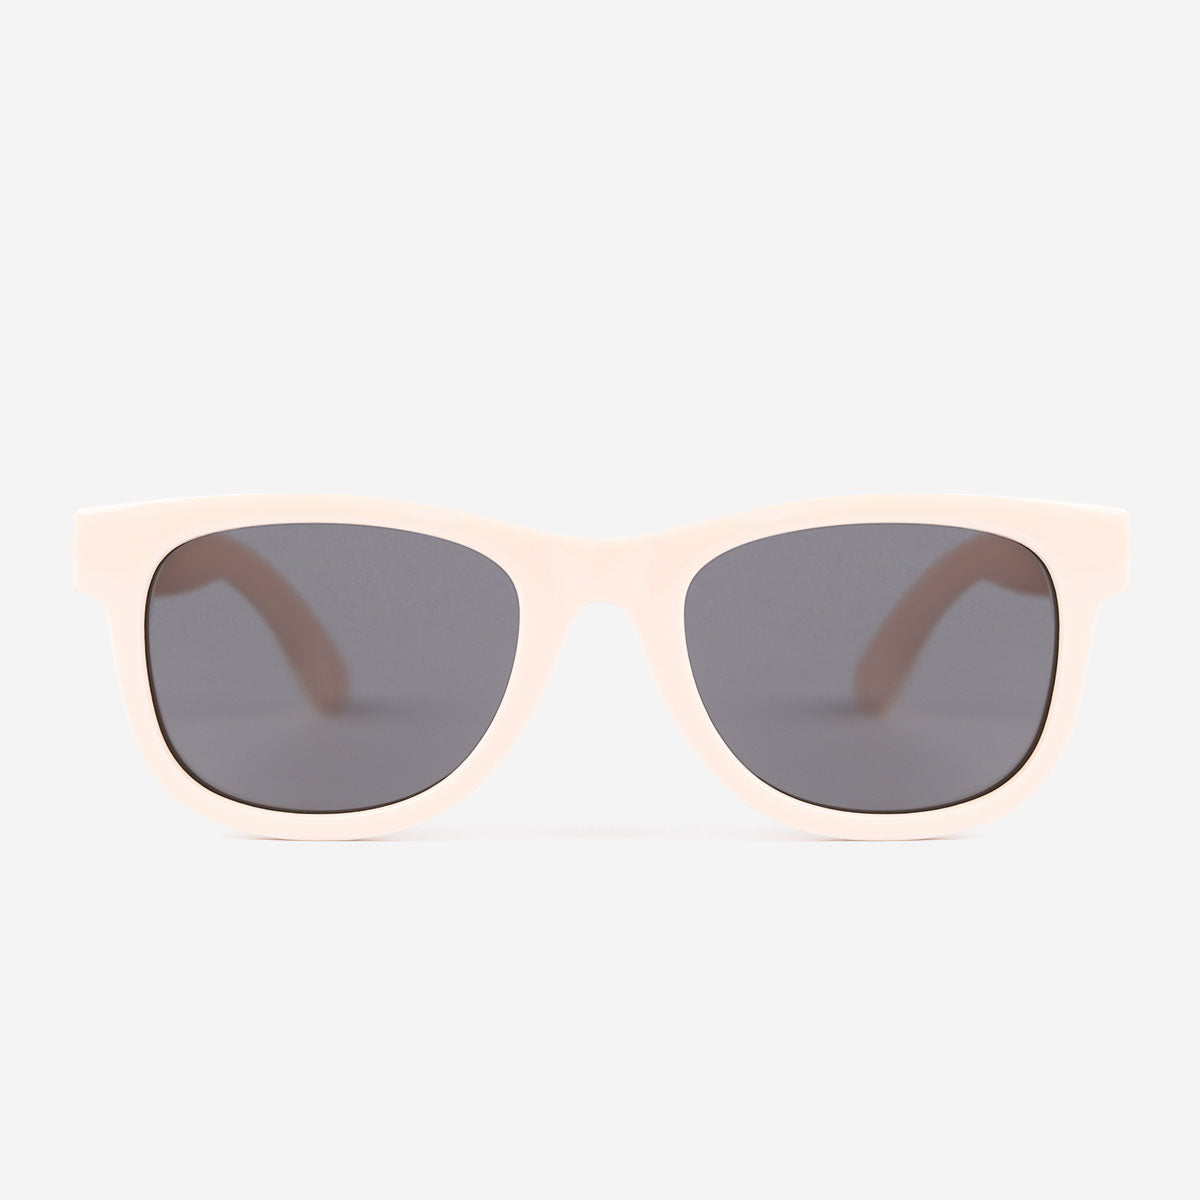 Polarized Baby Sunglassess for ages 0-2 years